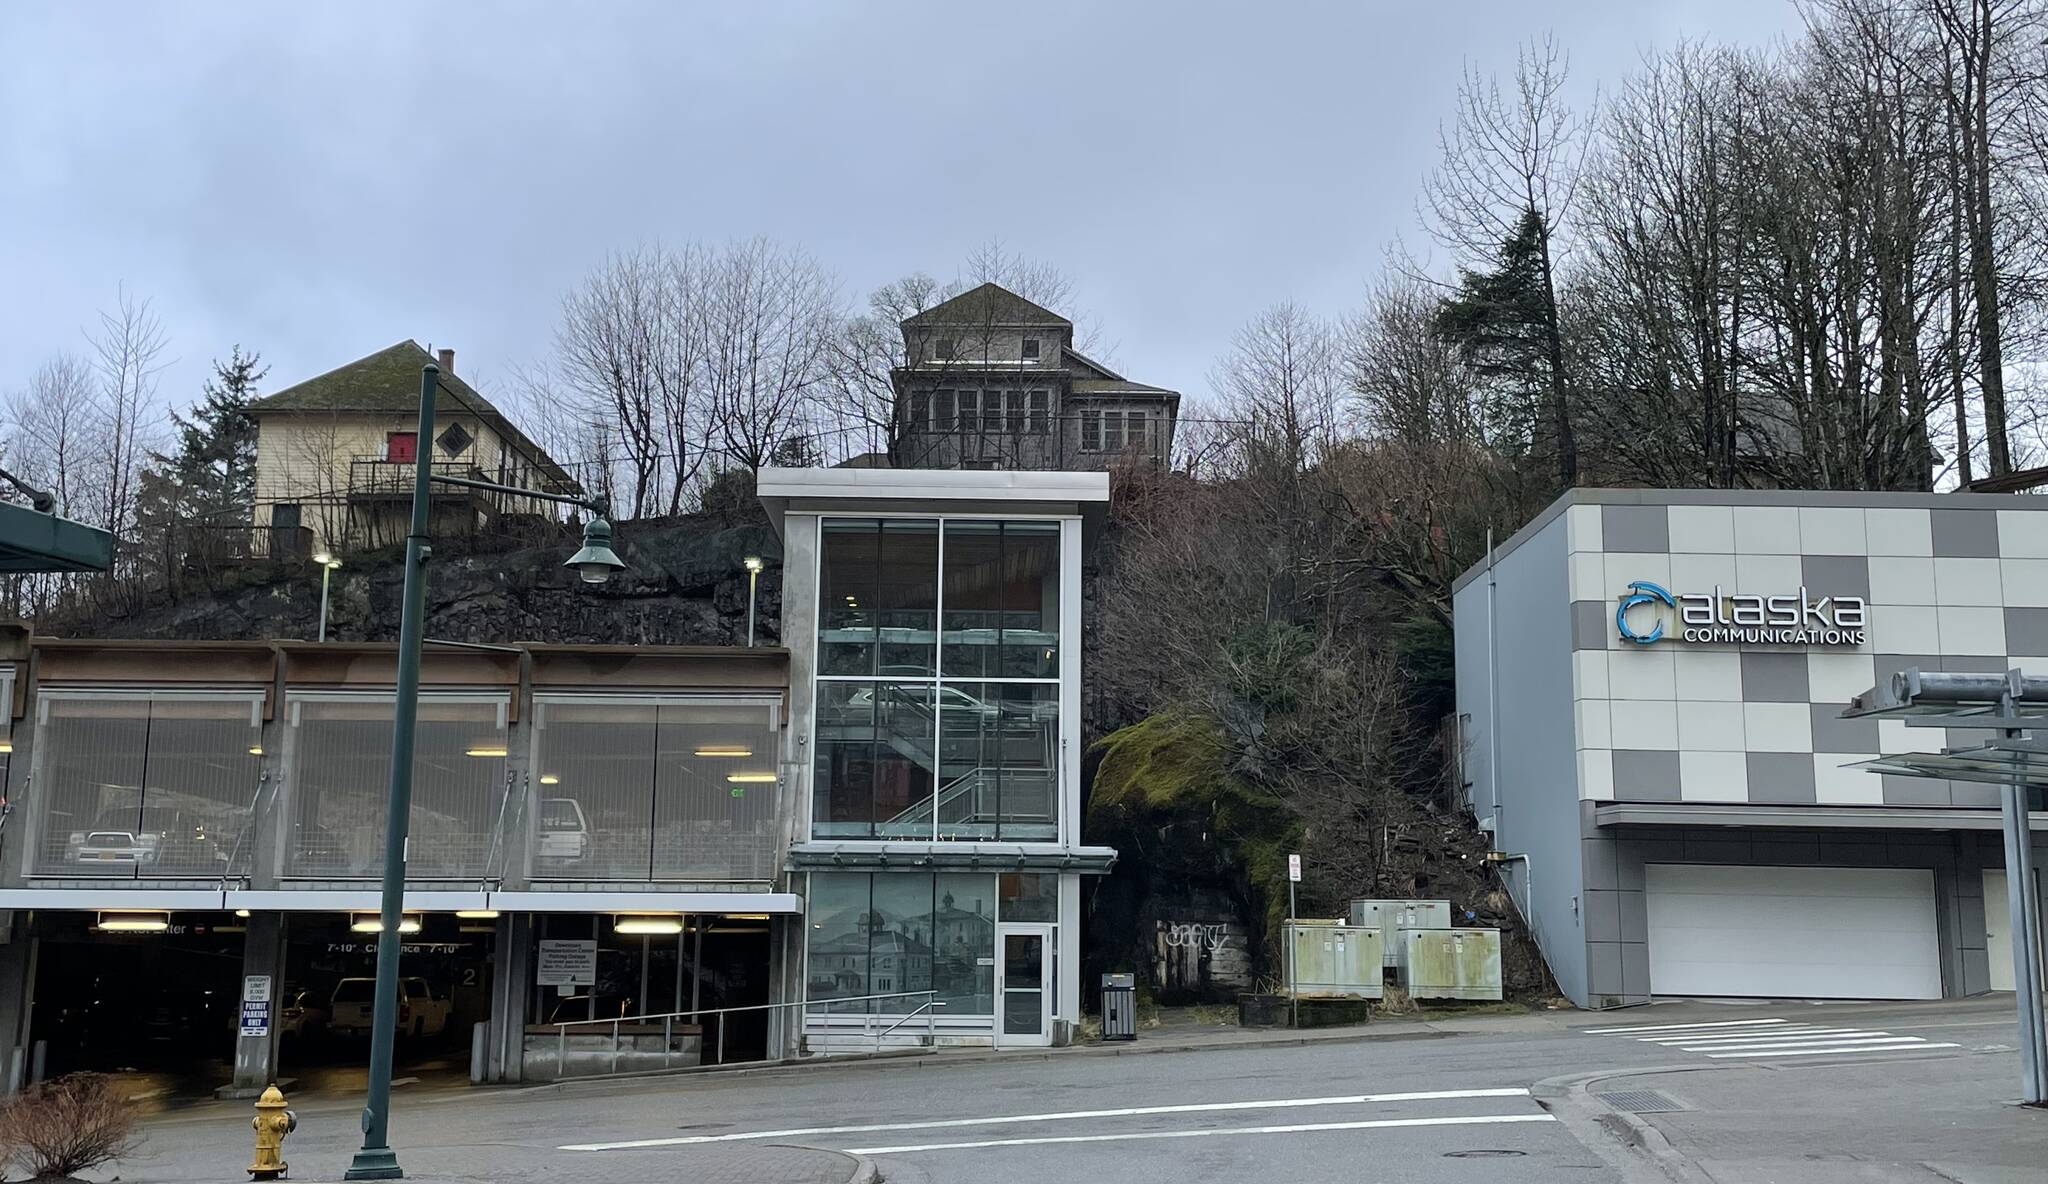 Looking up at the 1882 Edward Webster House on Telephone Hill from Second Street and Main Street in January 2024. Webster’s early telephone company operated from a 1915 addition to this house and gave the hillside its name. Note the decorative historic courthouse photo in the lower level window of the parking garage and the present ACS telephone building nearby. (Photo by Laurie Craig)